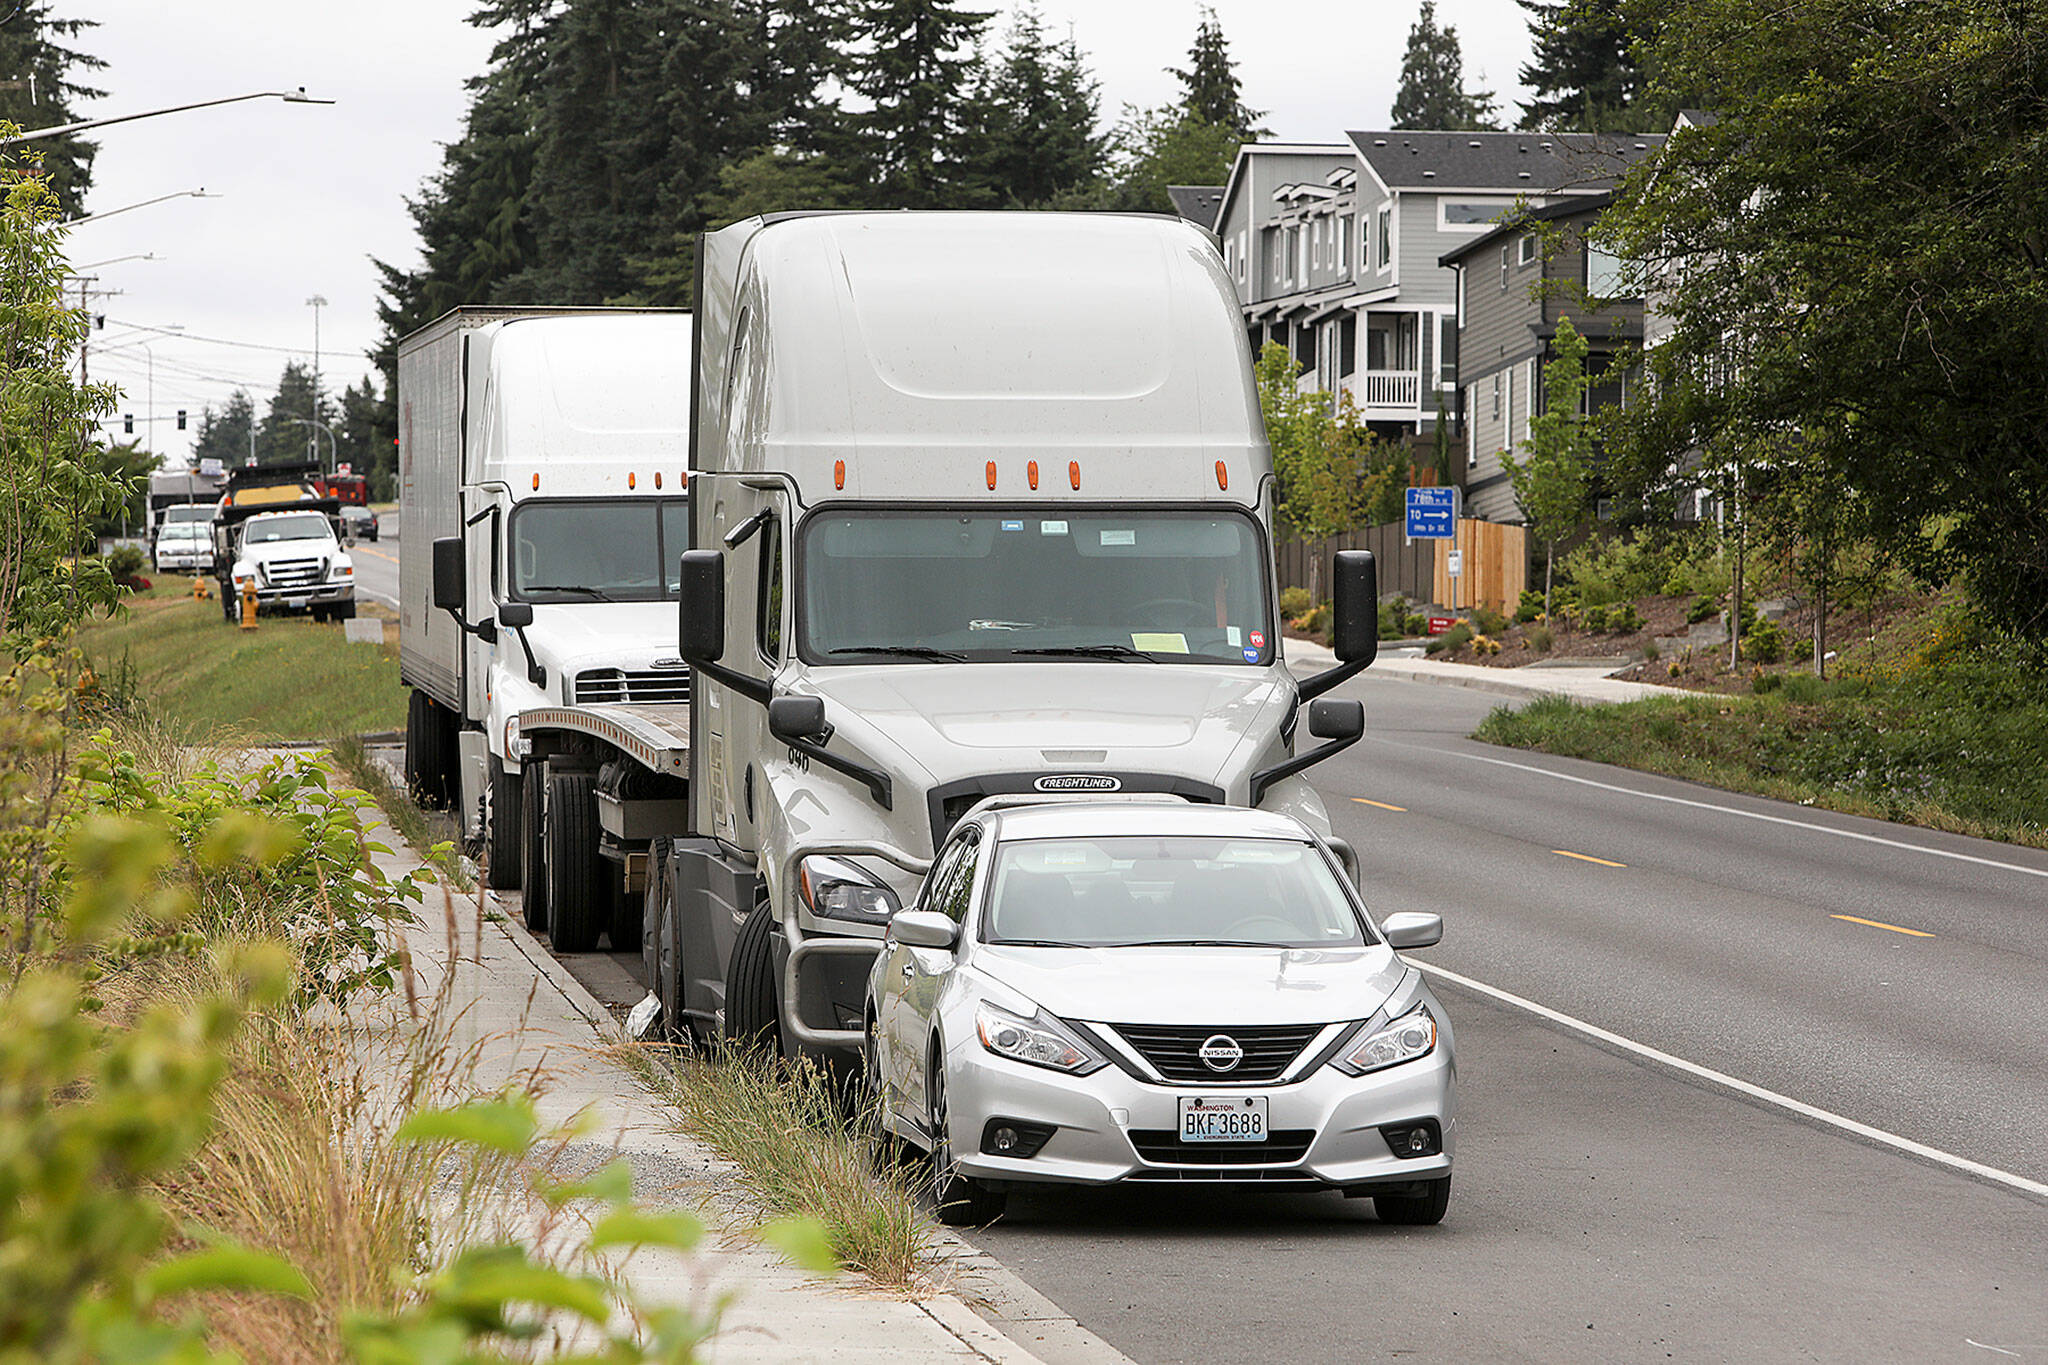 In 2019 Snohomish County adopted a 12-hour parking limit within a 24-hour period for tractor trailers and other large vehicles in urban residential areas outside city limits. (Lizz Giordano / Herald file)